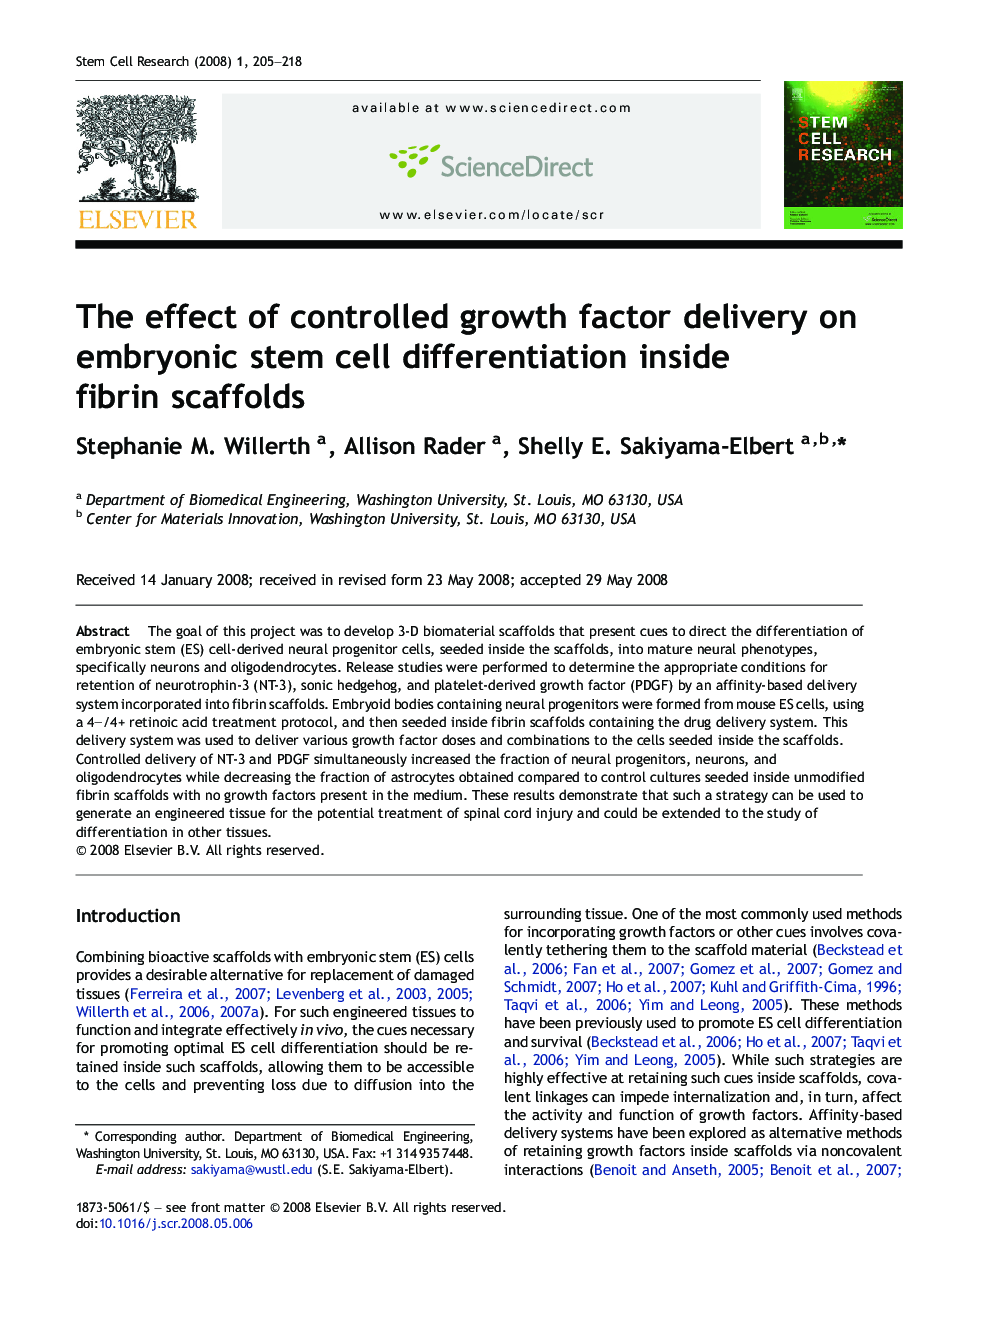 The effect of controlled growth factor delivery on embryonic stem cell differentiation inside fibrin scaffolds